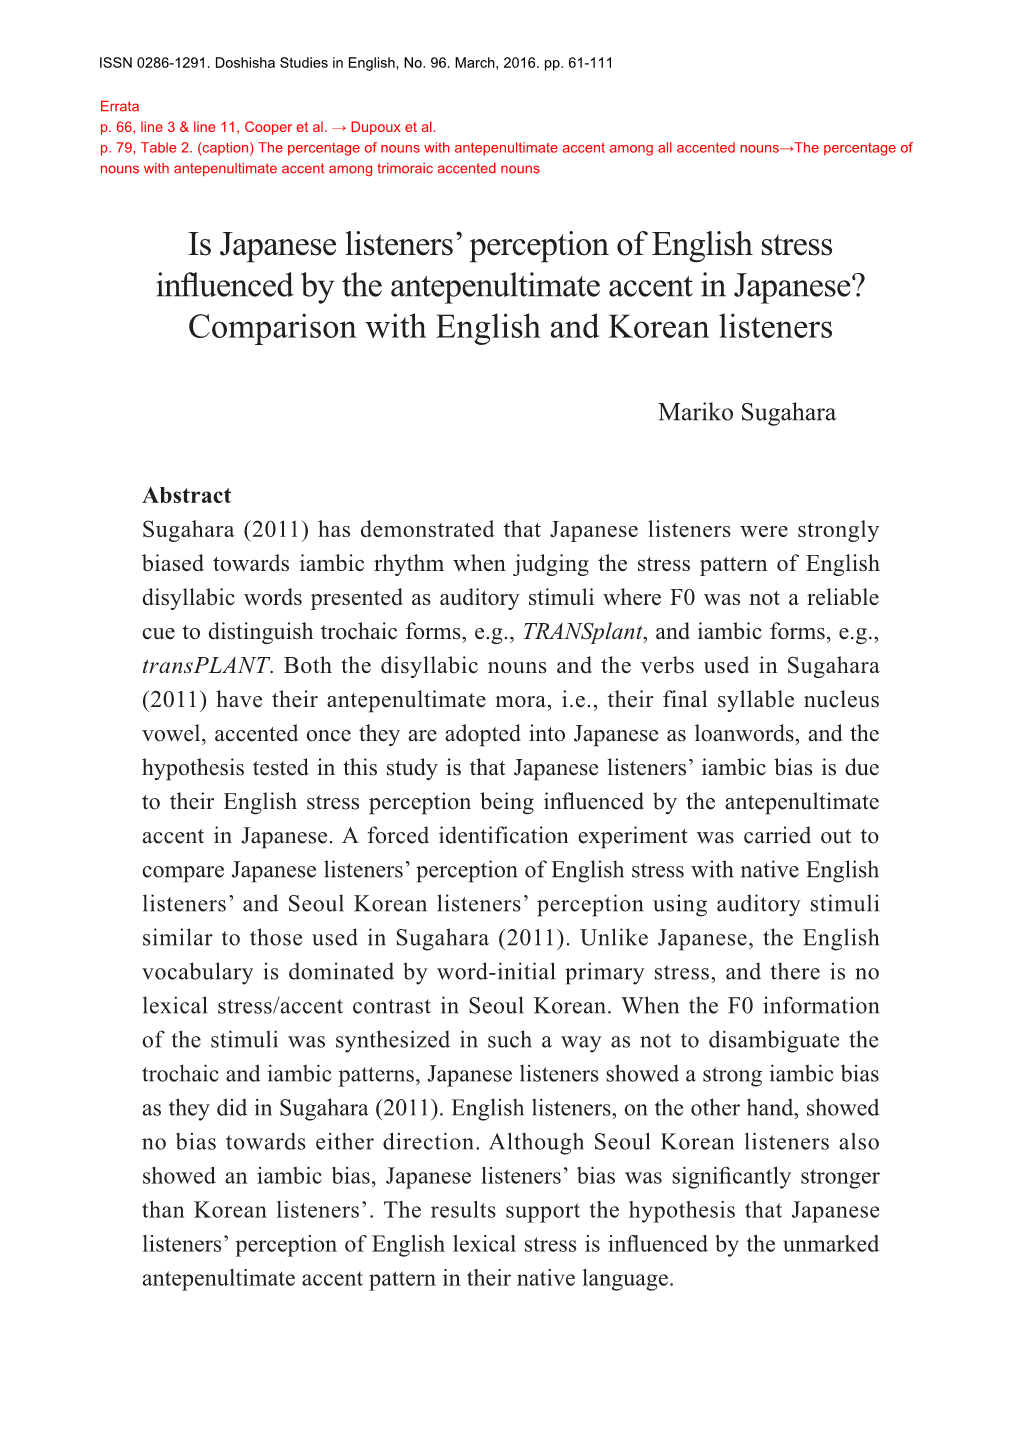 Is Japanese Listeners' Perception of English Stress Influenced by The